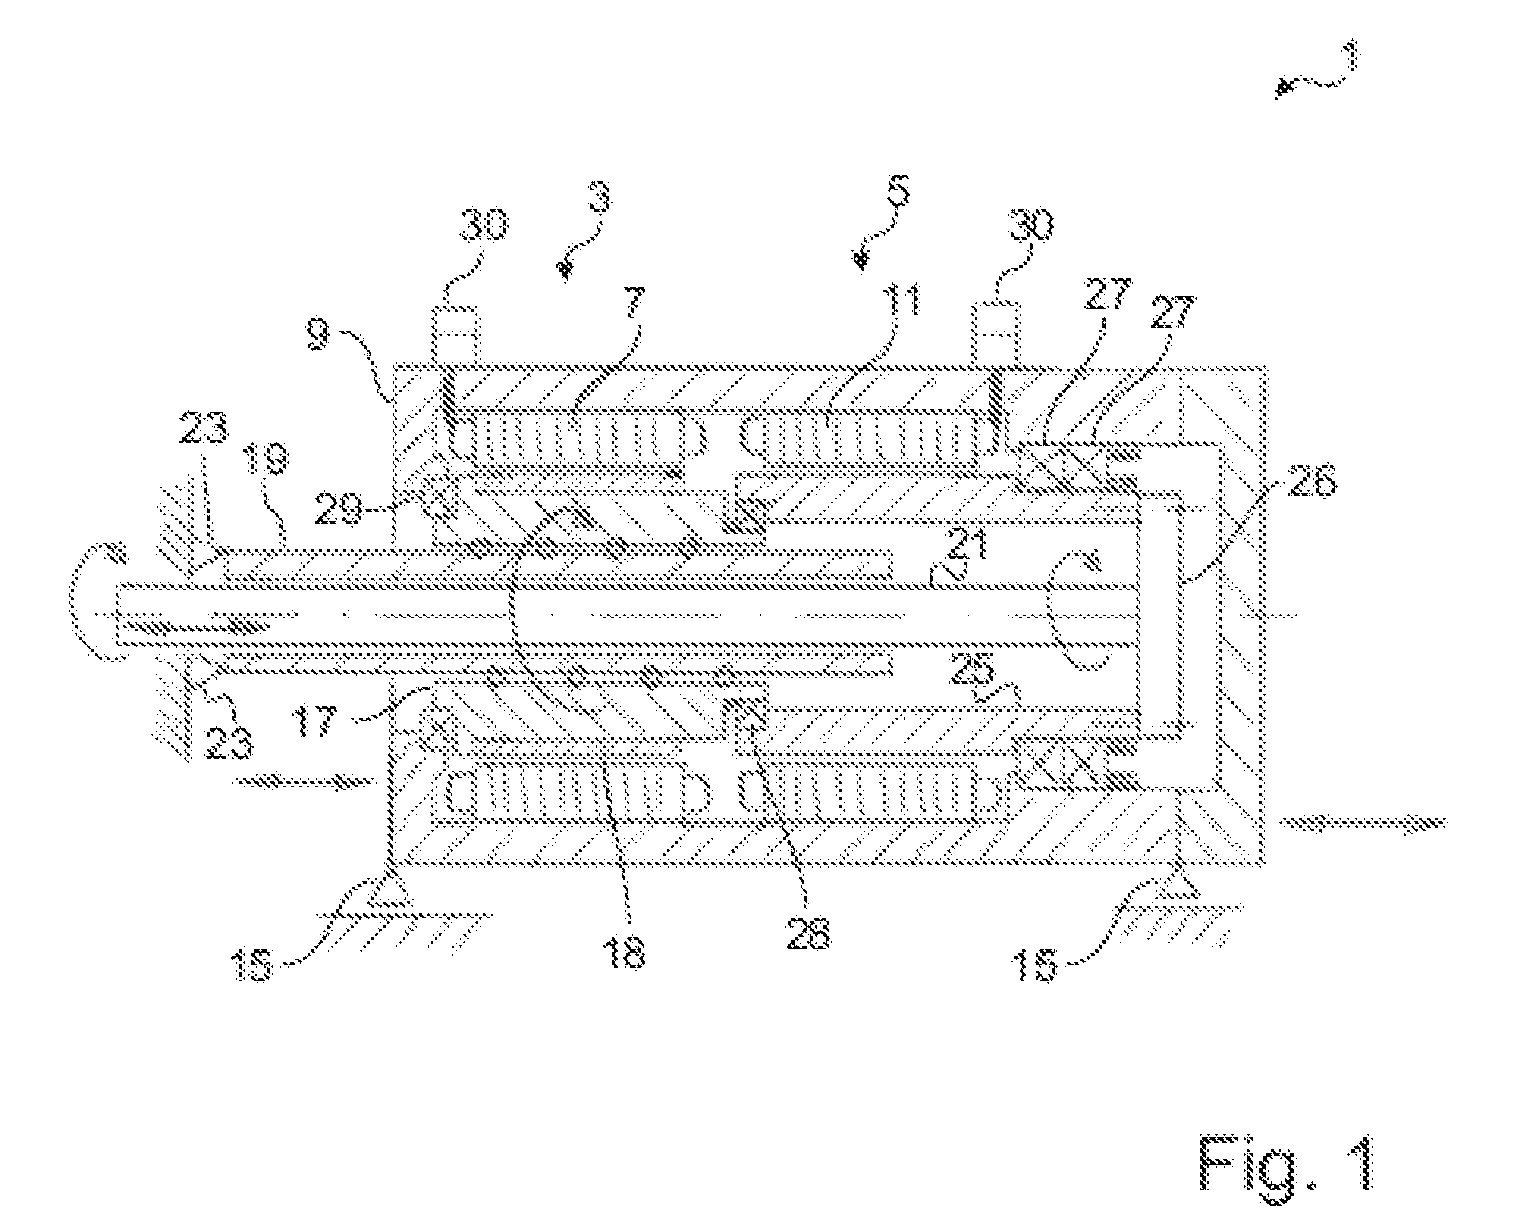 Drive apparatus for driving a worm of an injection molding machine